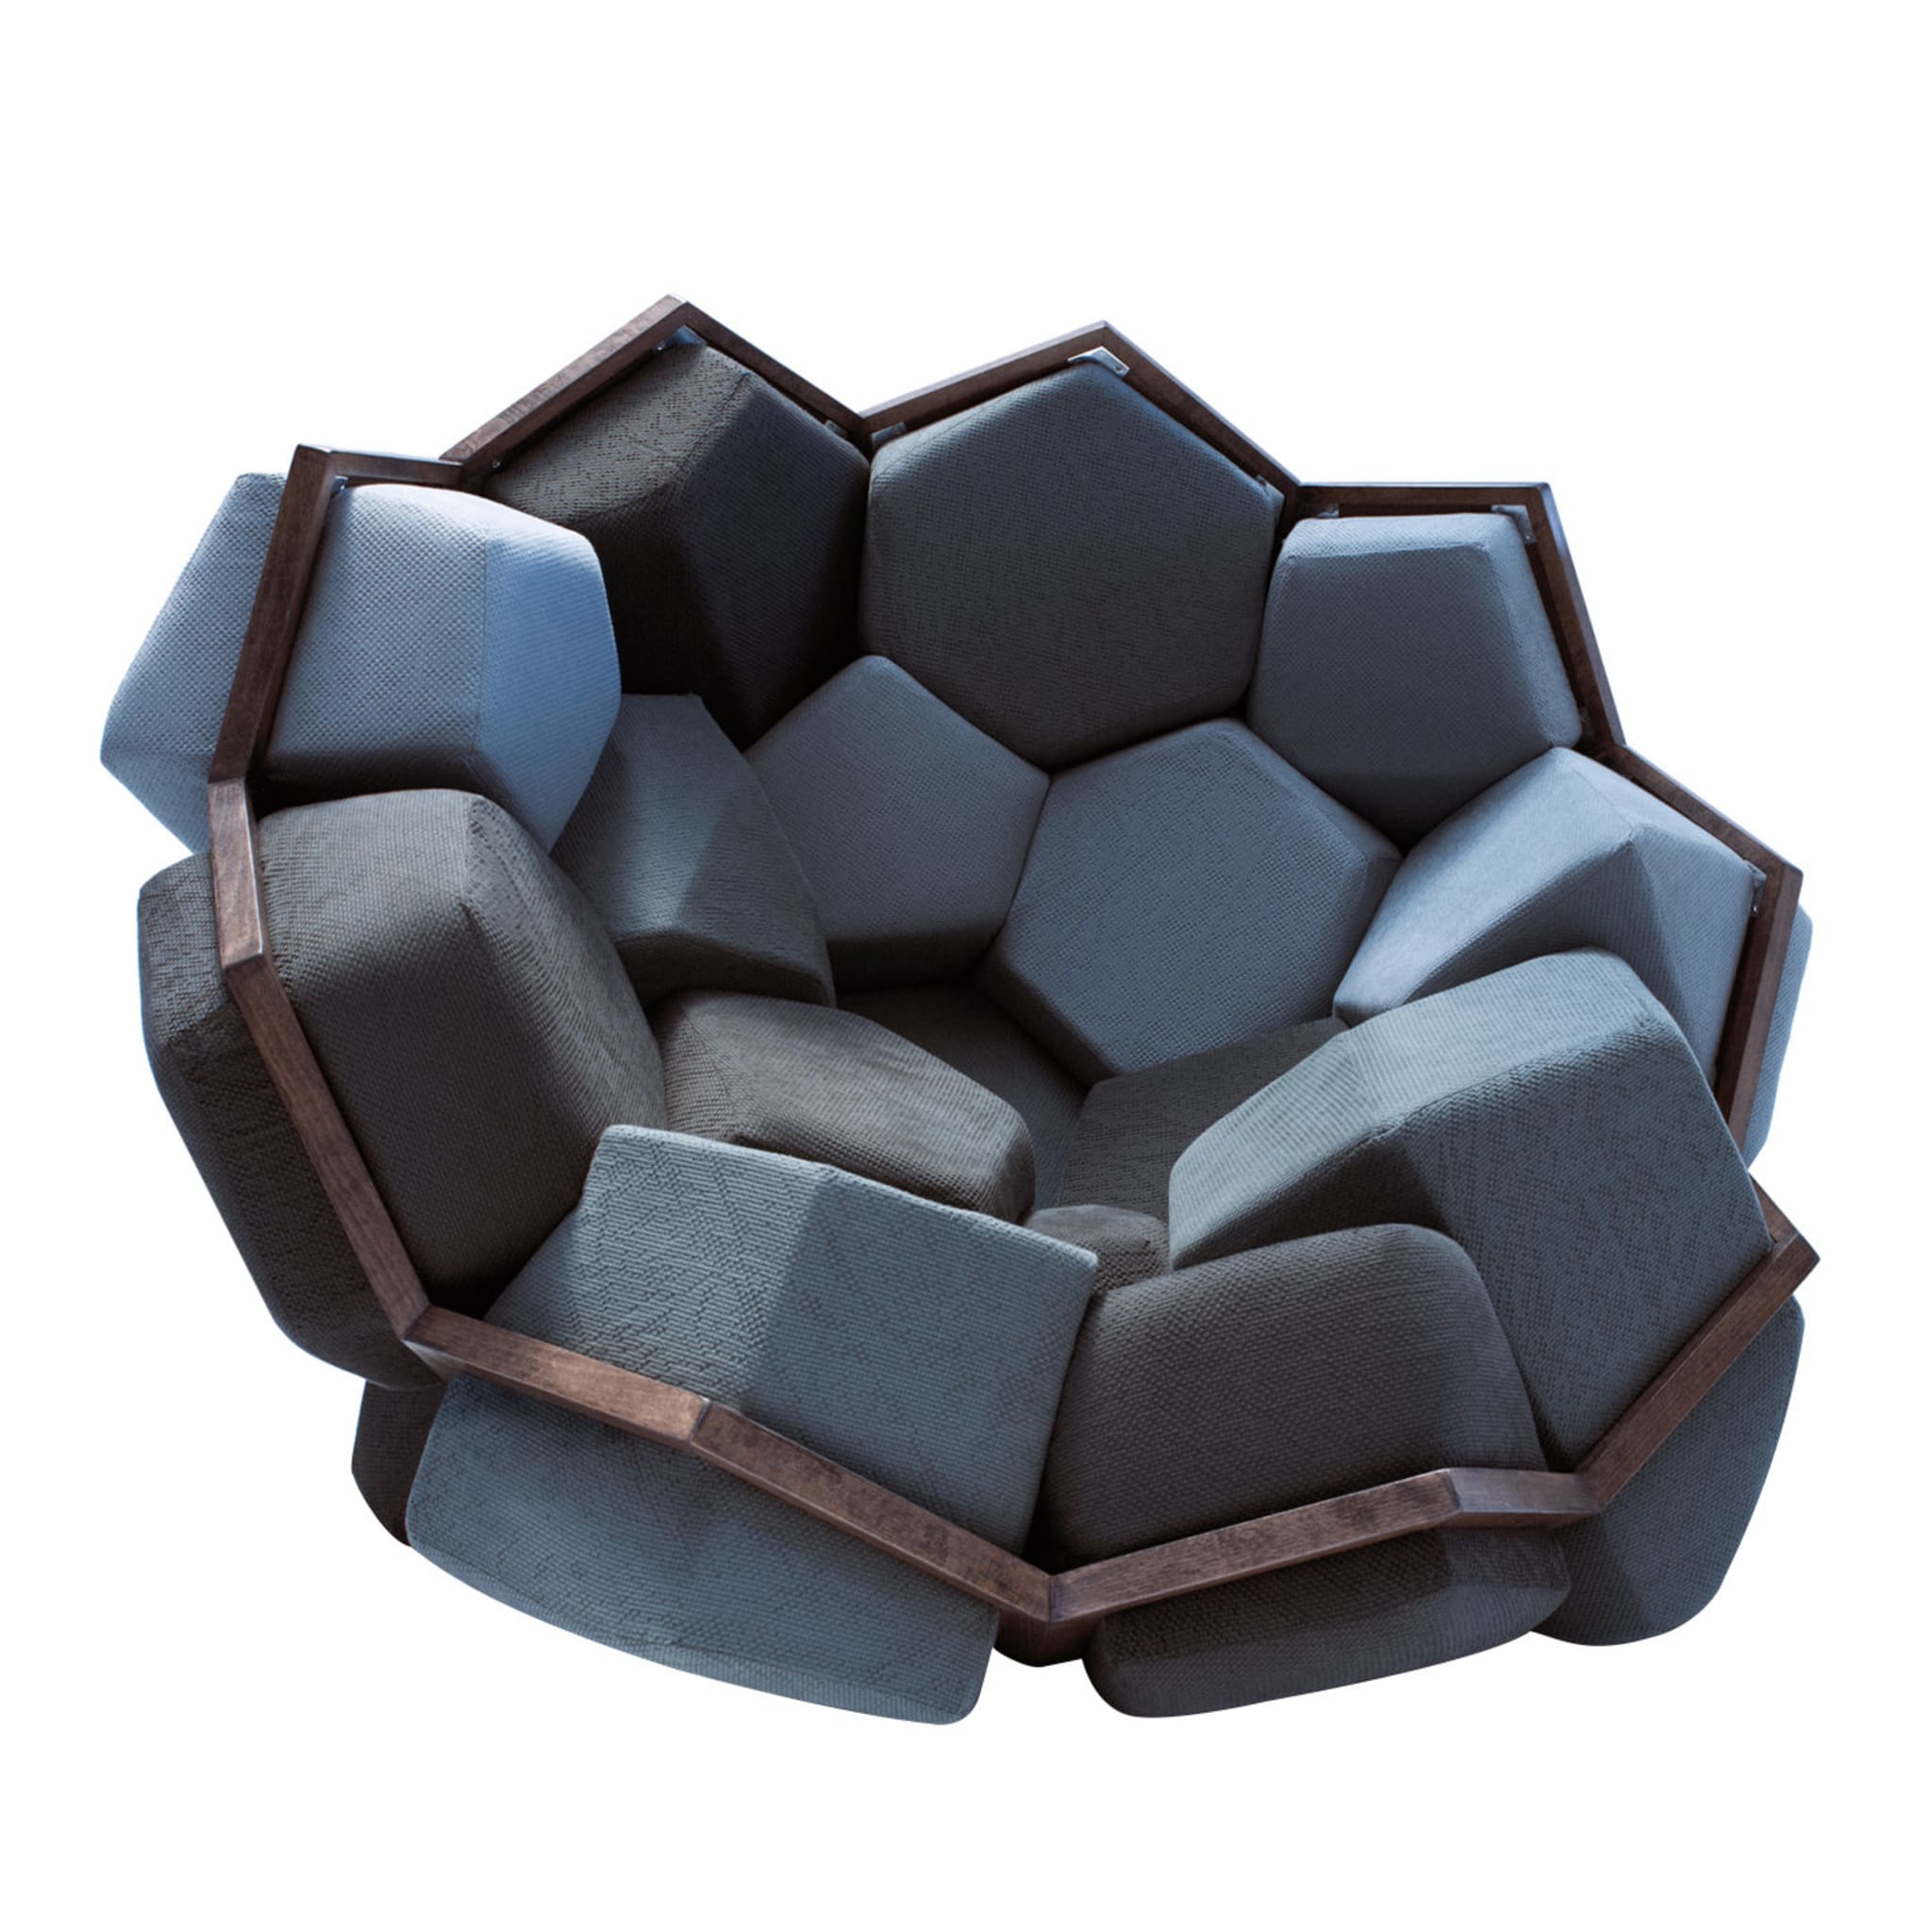 Quartz Ecological Armchair by CRTL ZAK and Davide Barzaghi - Main view